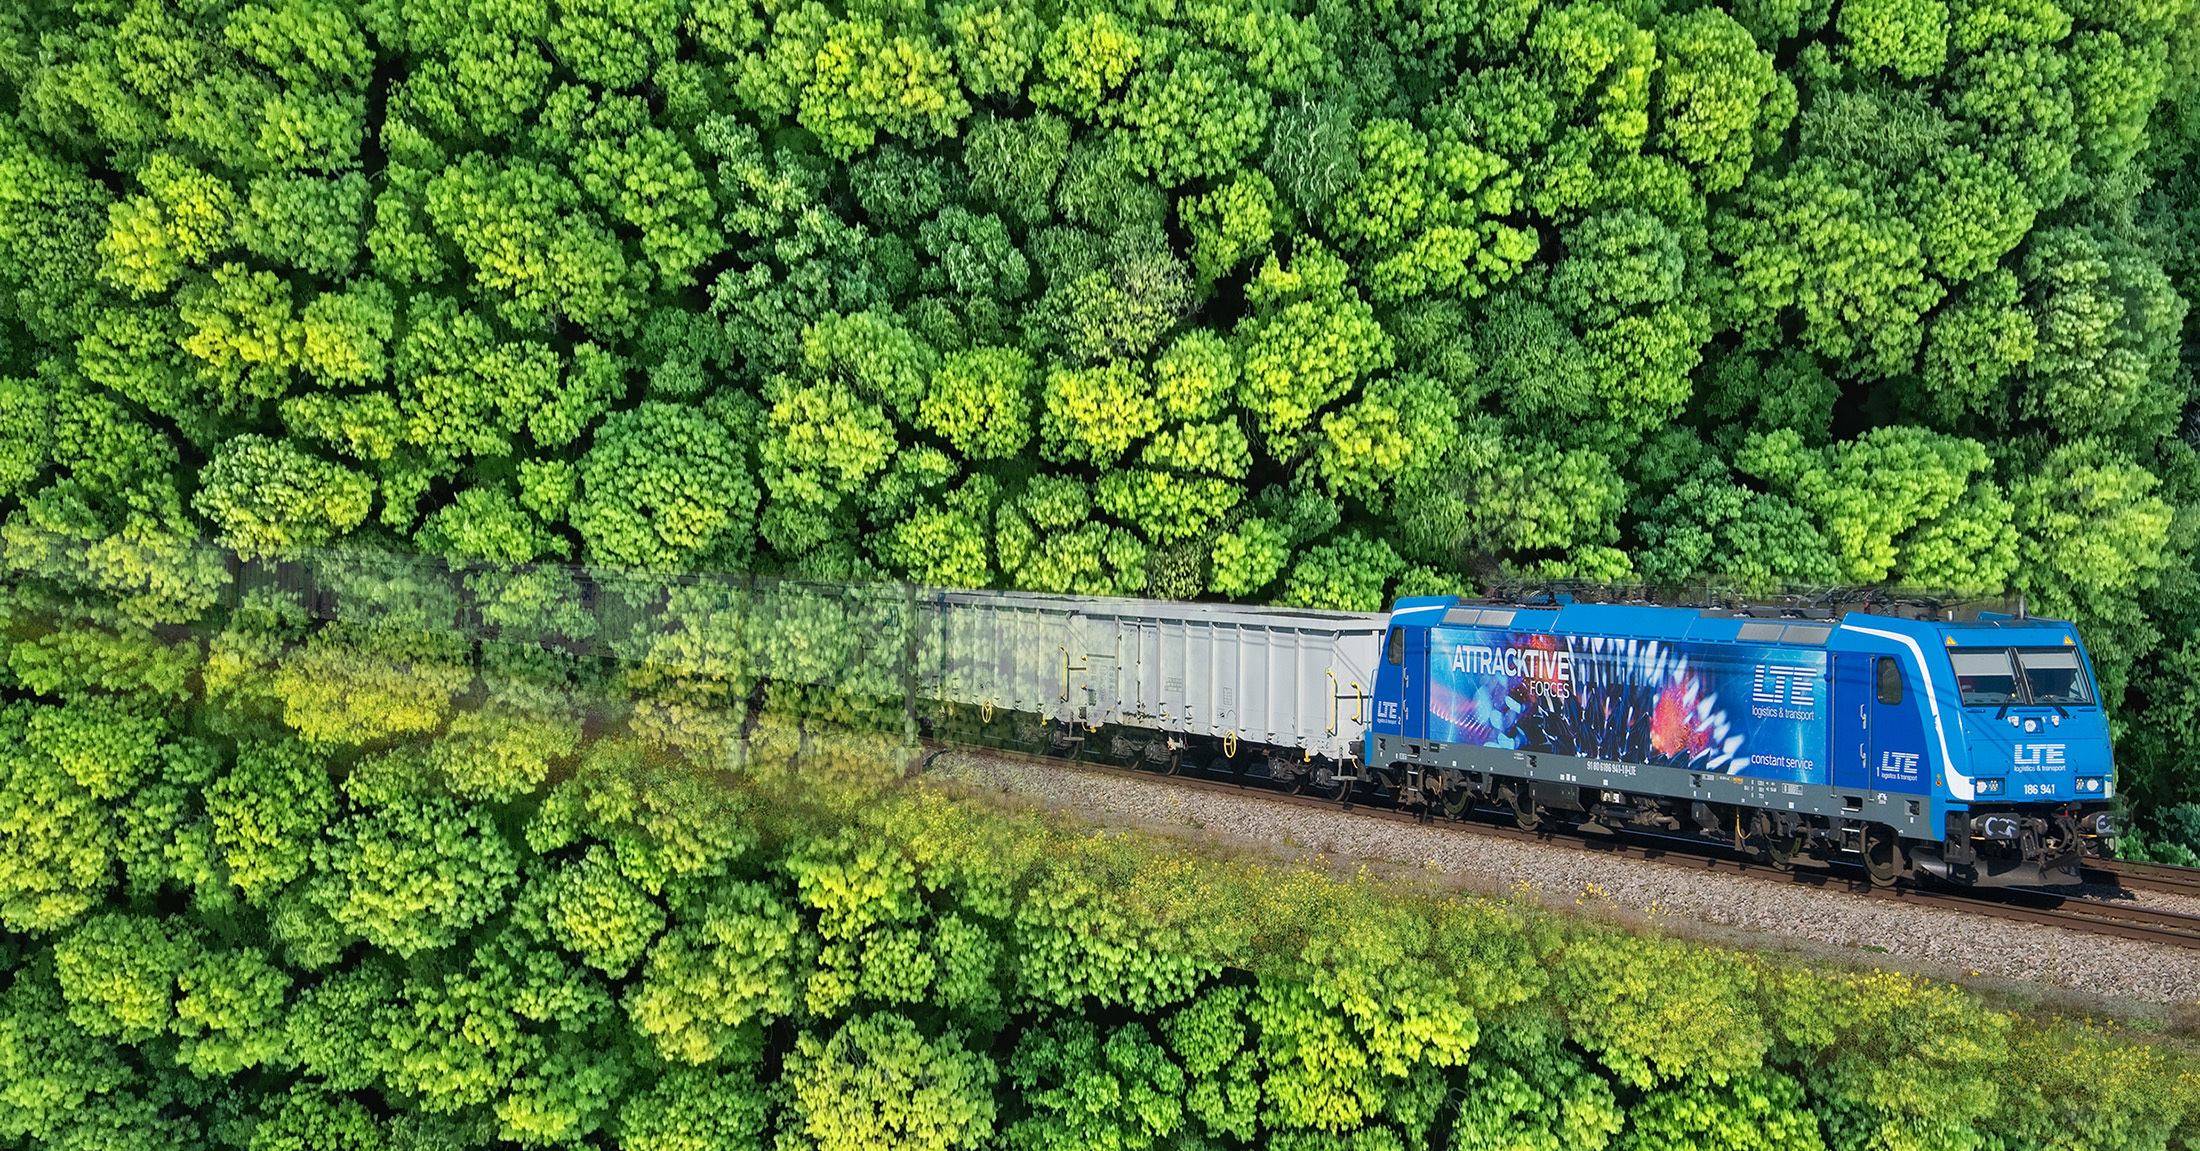 With the railroad, Green Logistics would already be on track.